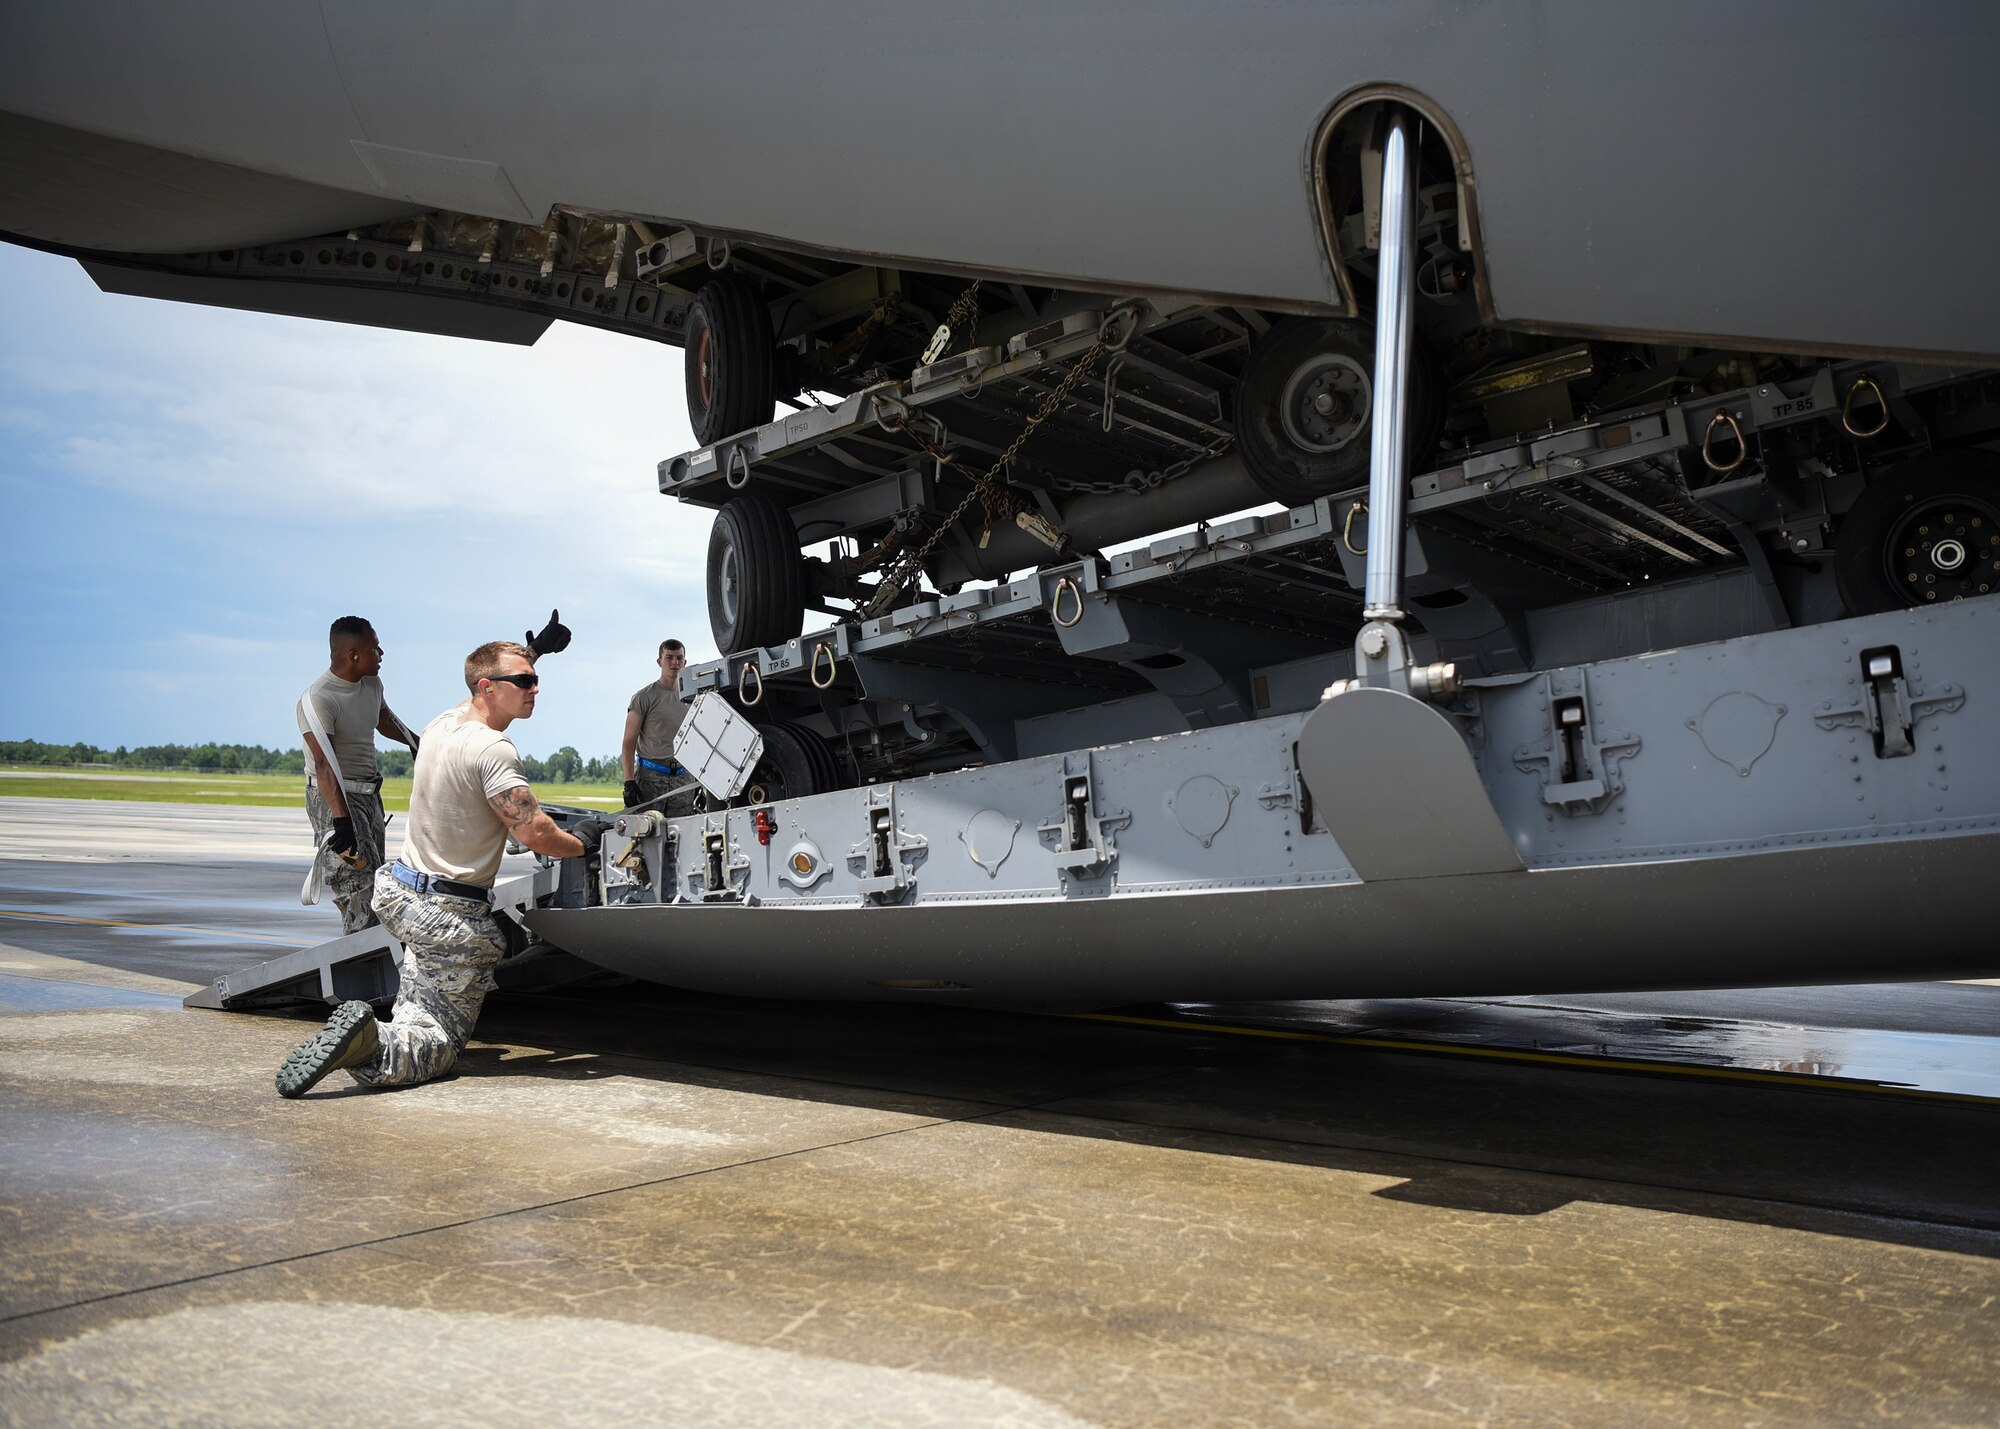 Staff Sgt. Mitchel Bordley, 23d Logistics Readiness Squadron air terminal operations supervisor, gives a thumbs-up to Airmen loading a C-17 Globemaster III, July 5, 2018, at Moody Air Force Base, Ga.  Airmen loaded approximately 68,000 pounds of cargo onto a C-17 to aid the 75th Fighter Squadron (FS) prior to a deployment. The 75th FS and supporting units recently deployed to an undisclosed location in support of Operation Spartan Shield. (U.S. Air Force photo by Airman Taryn Butler)